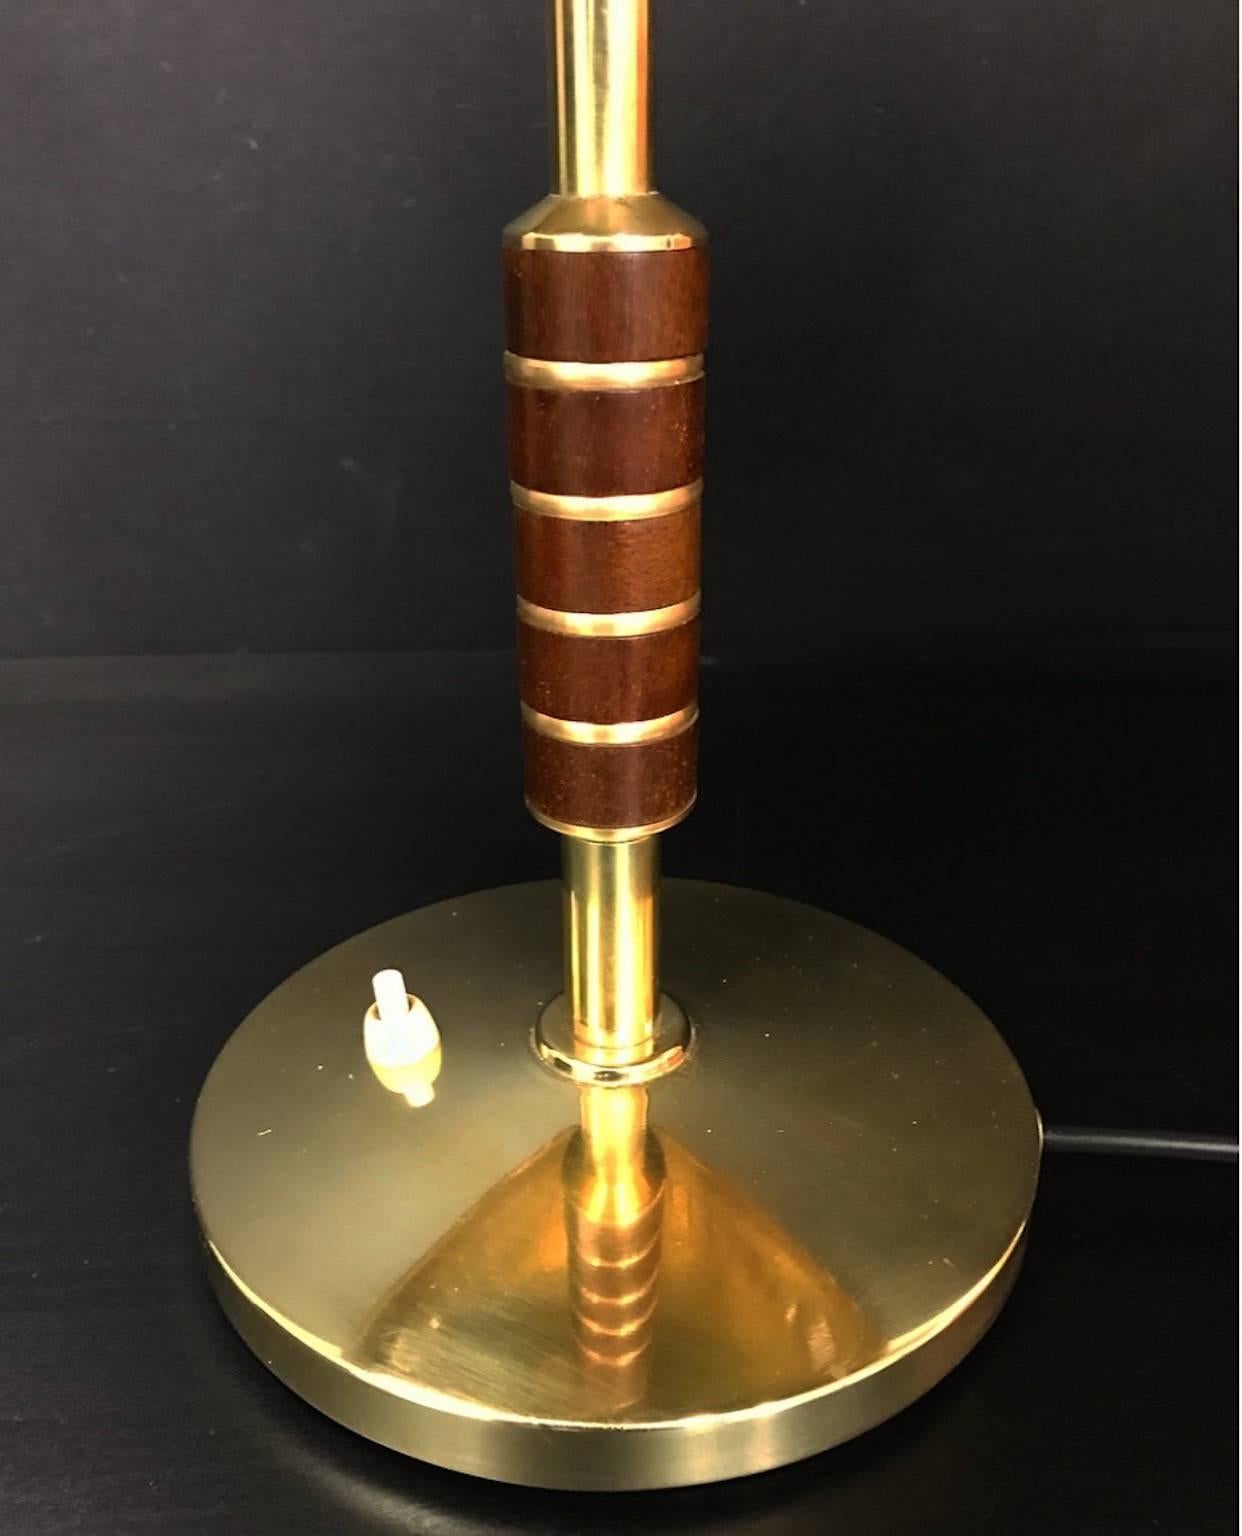 Beautiful and elegant brass table lamp from dansih LYFA 1956. Model number B146.

The stem is nicely decorated with five pieces of rosewood.

Solid brass with two-light sources.

Condition: All wiring has been restored and this particular